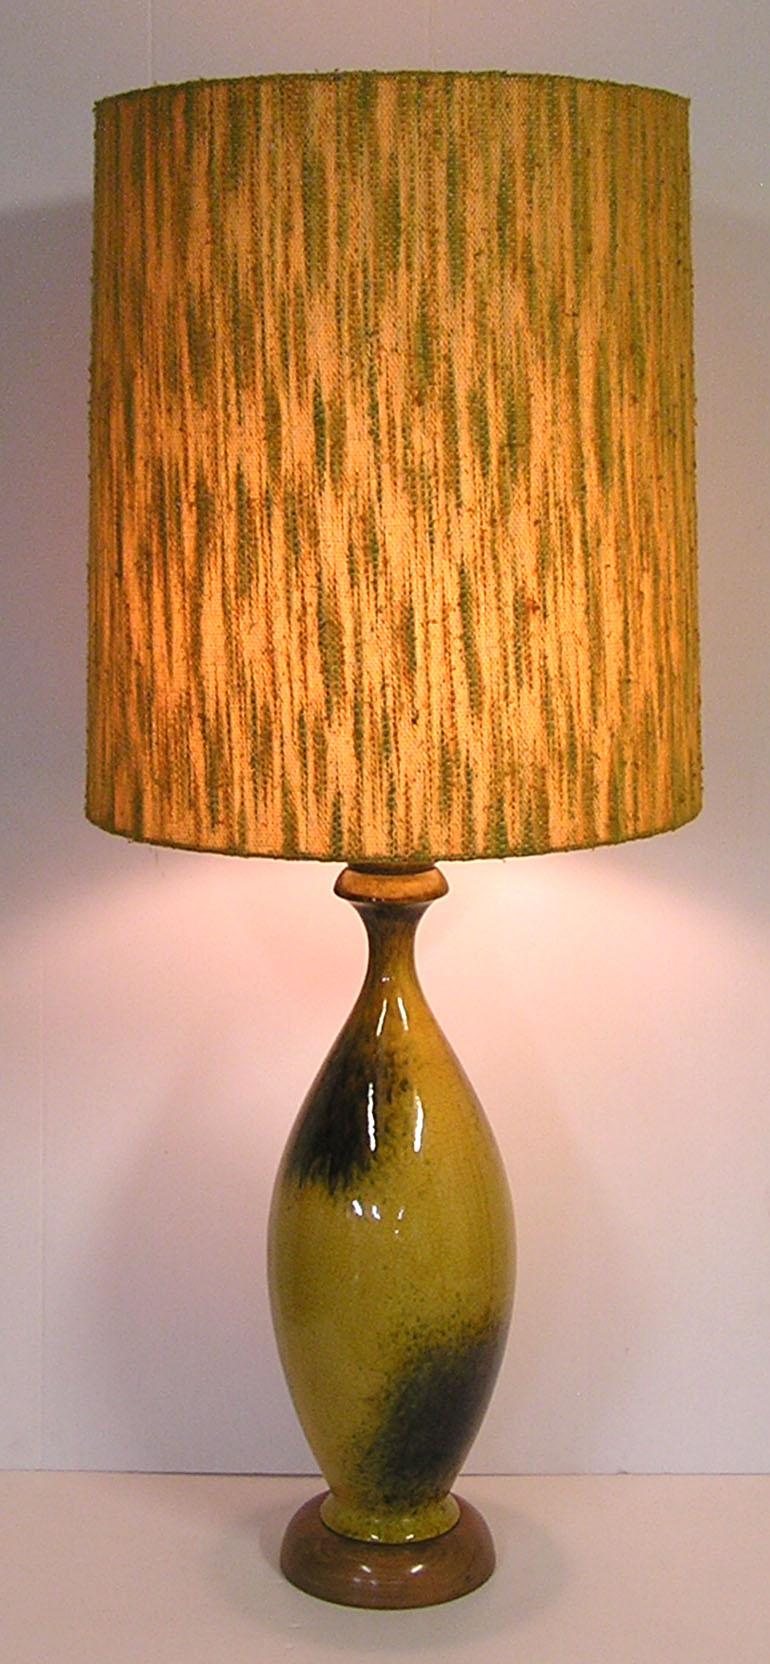 A large ceramic pottery lamp from the 1950s Mid-Century Modern era with original multi-toned fabric shade. Beautifully decorated in a mustard yellow base glaze and decorated throughout with blotched accents in a darker multi-colored glaze. Lamp sits